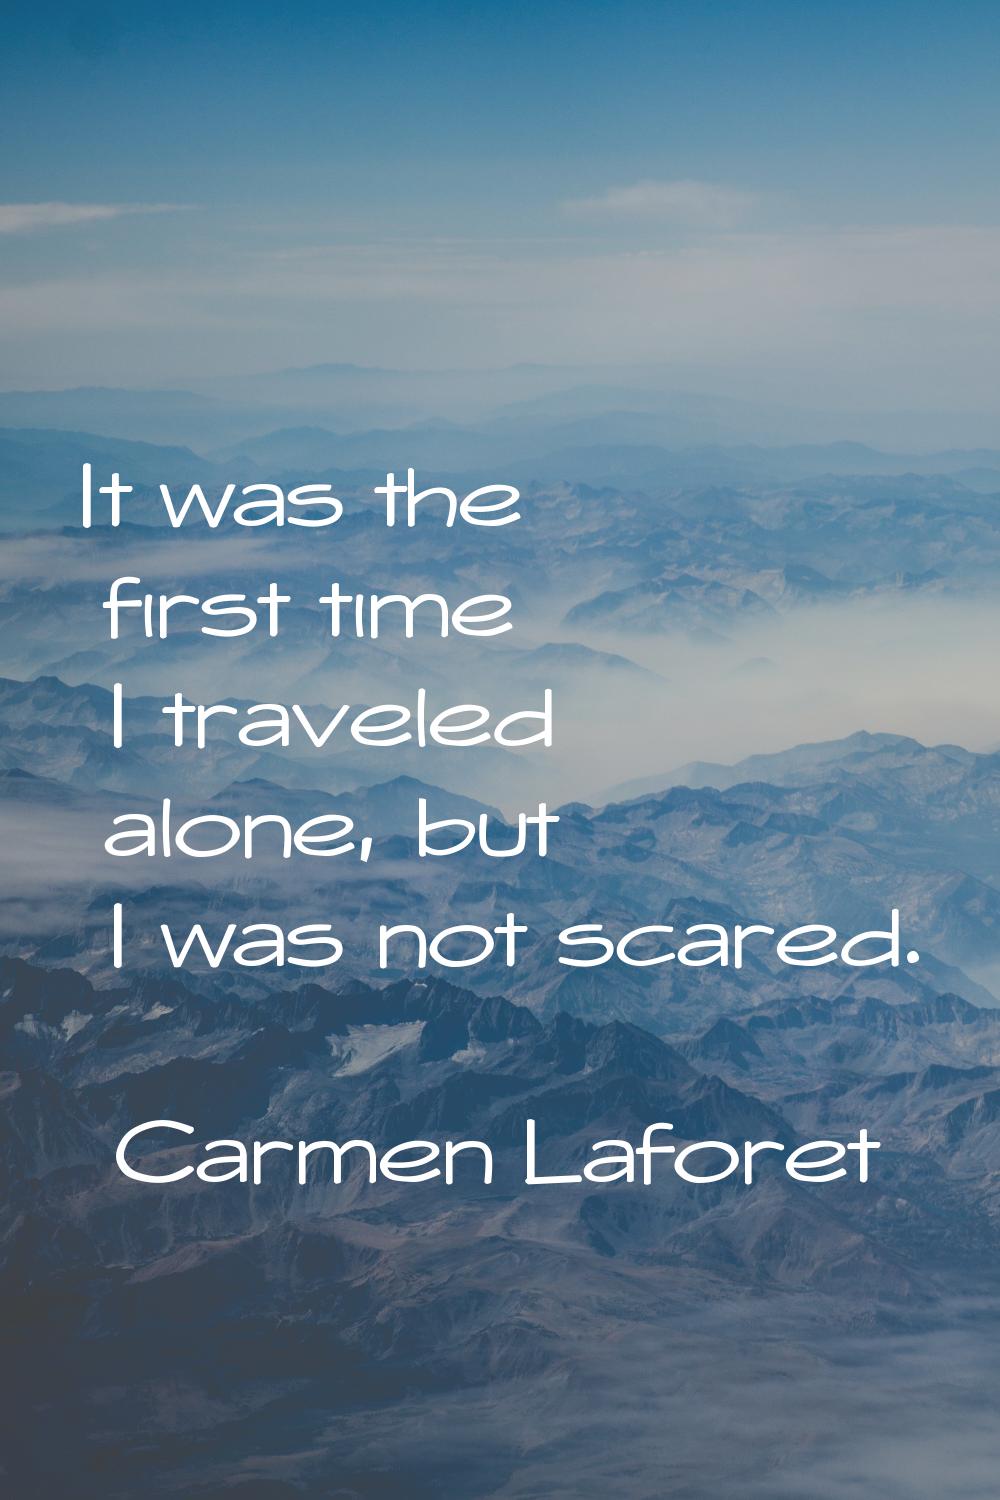 It was the first time I traveled alone, but I was not scared.